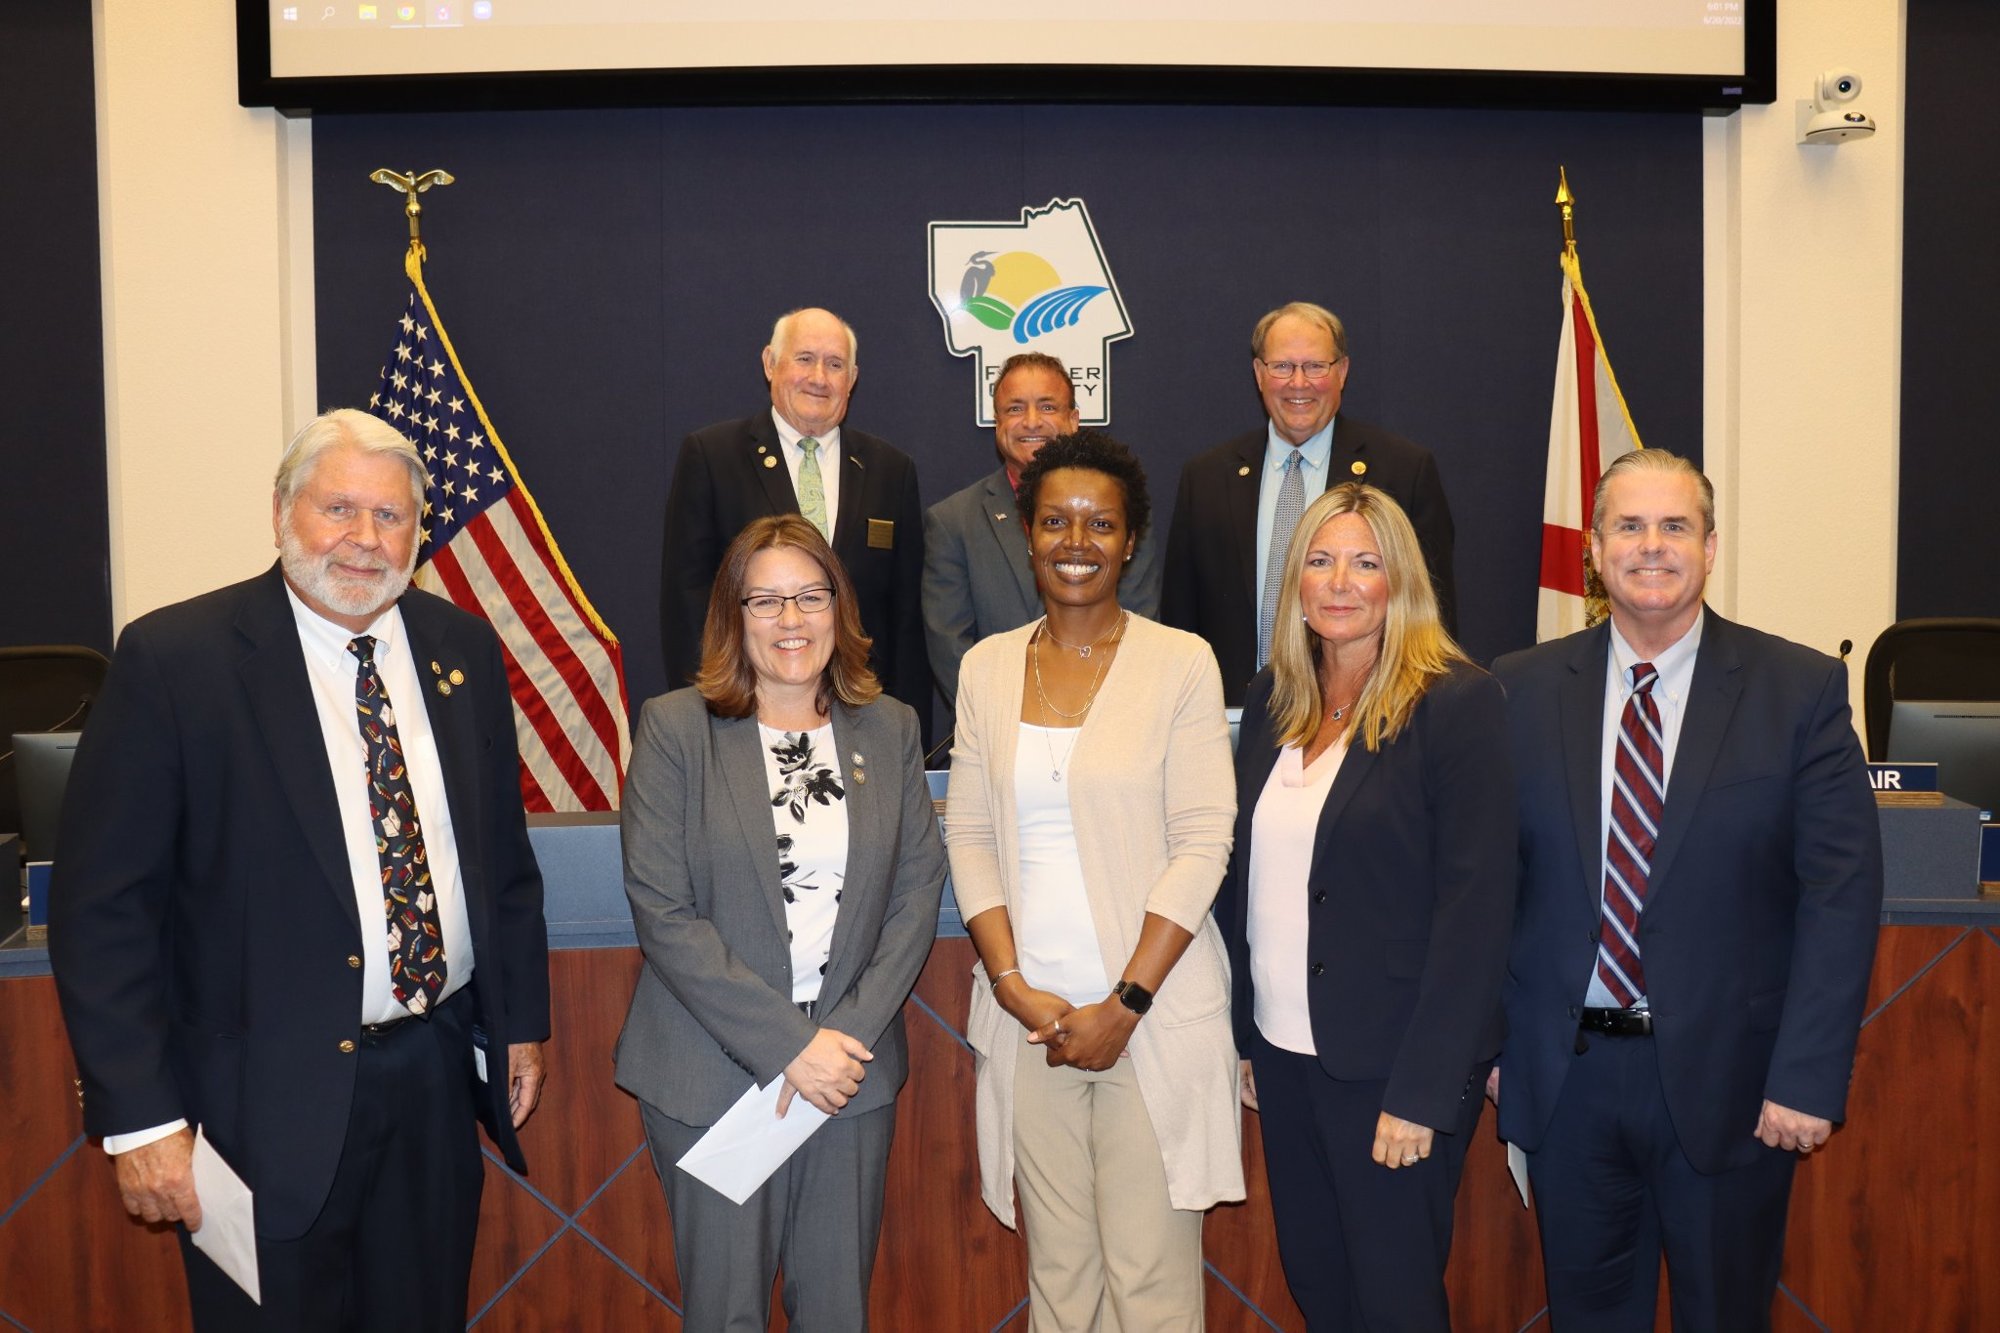 Class valedictorian and city of Bunnell Financial Services Coordinator Lakesha Byrd, center, with Leadership Academy instructors and local officials. Photo courtesy of Joe Saviak